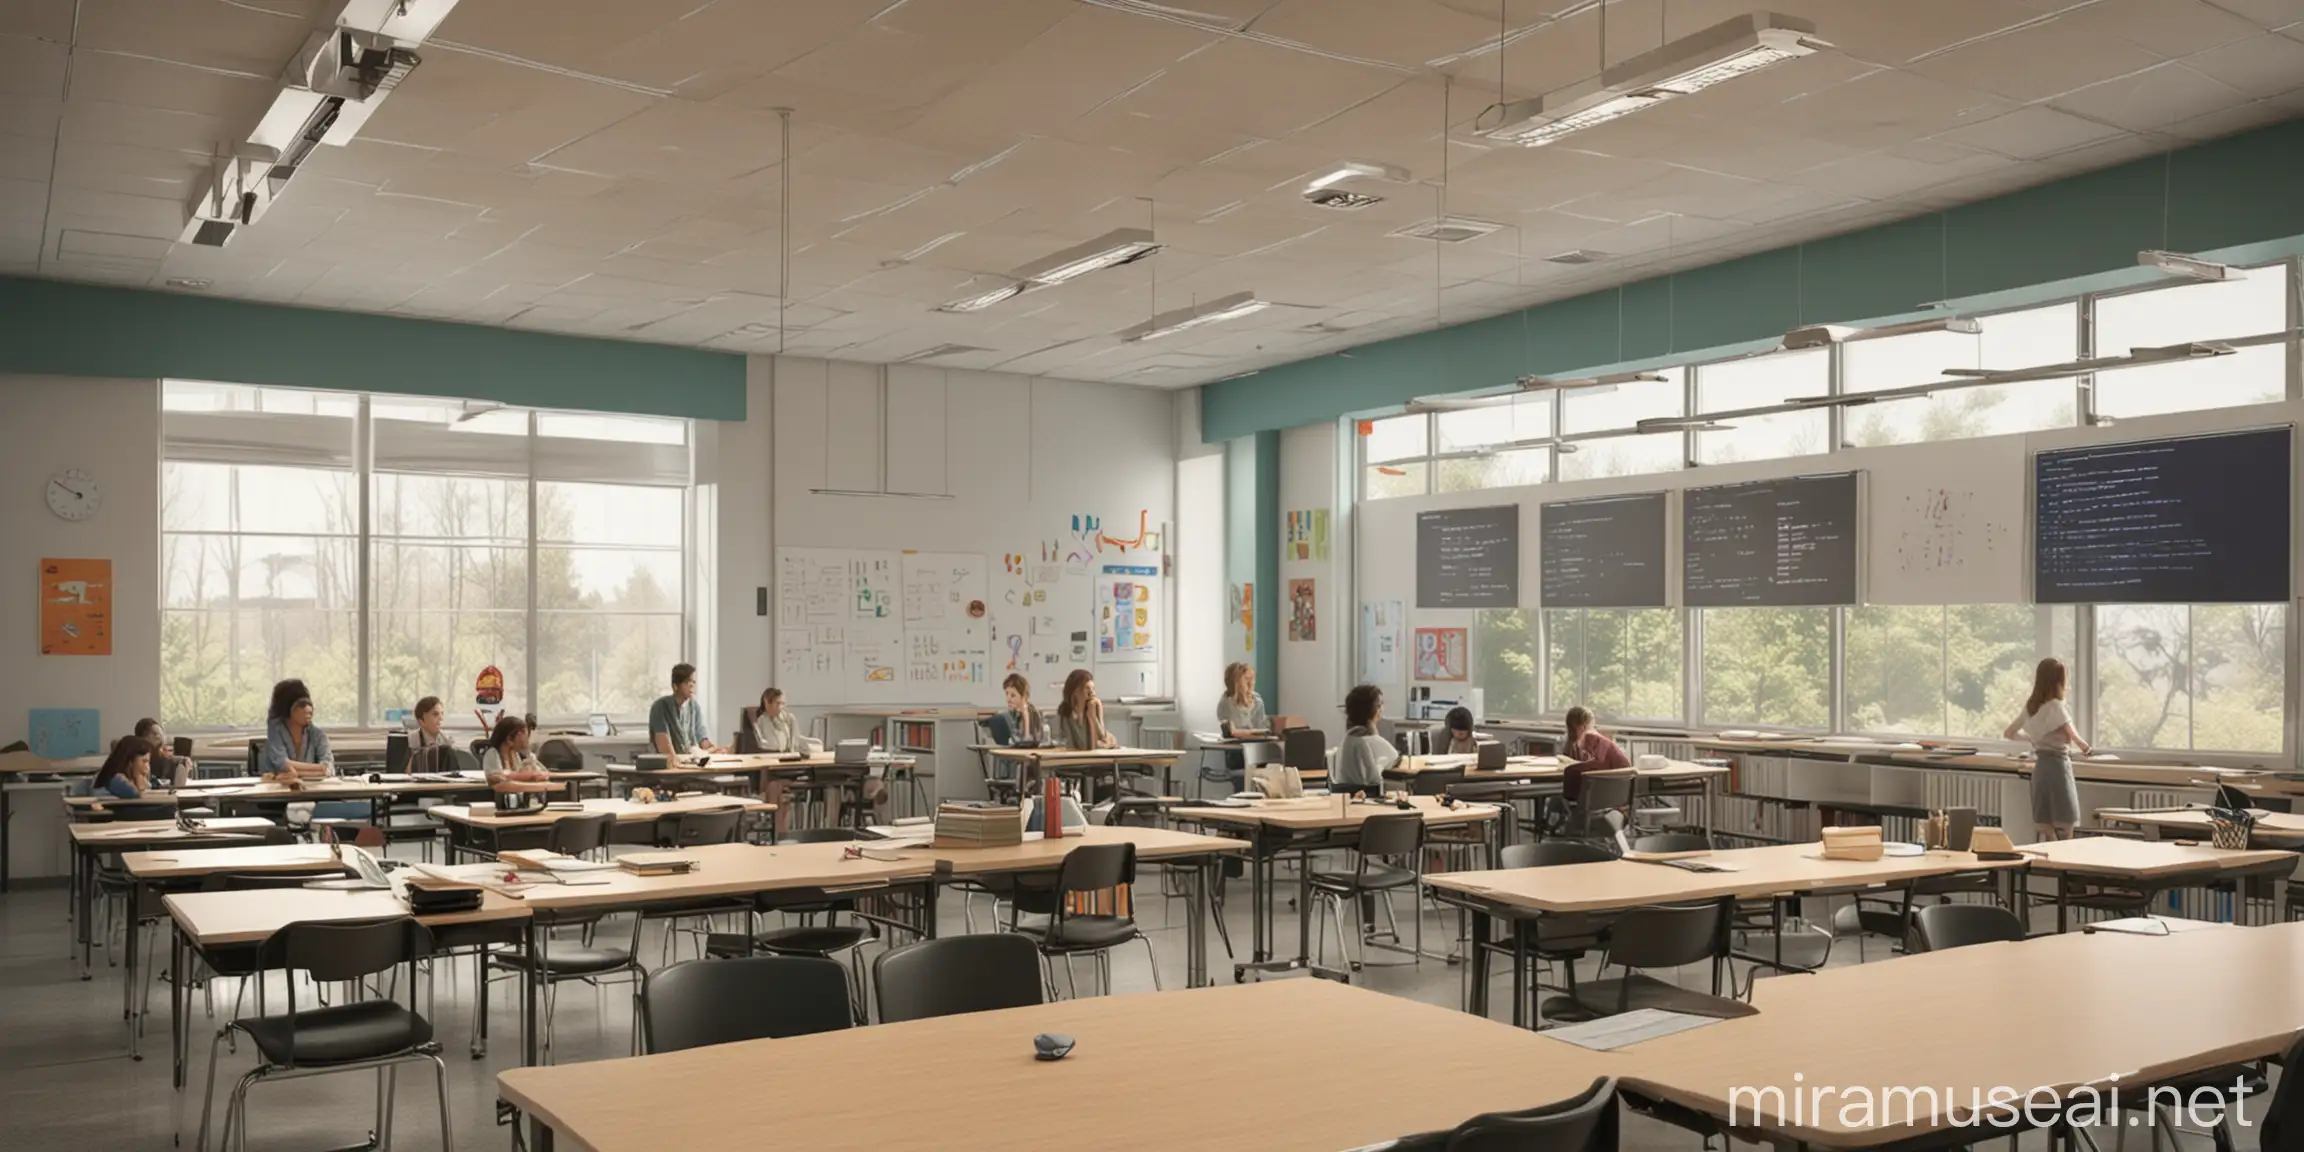 Modern Classroom with Interactive Desks and Engaged Students